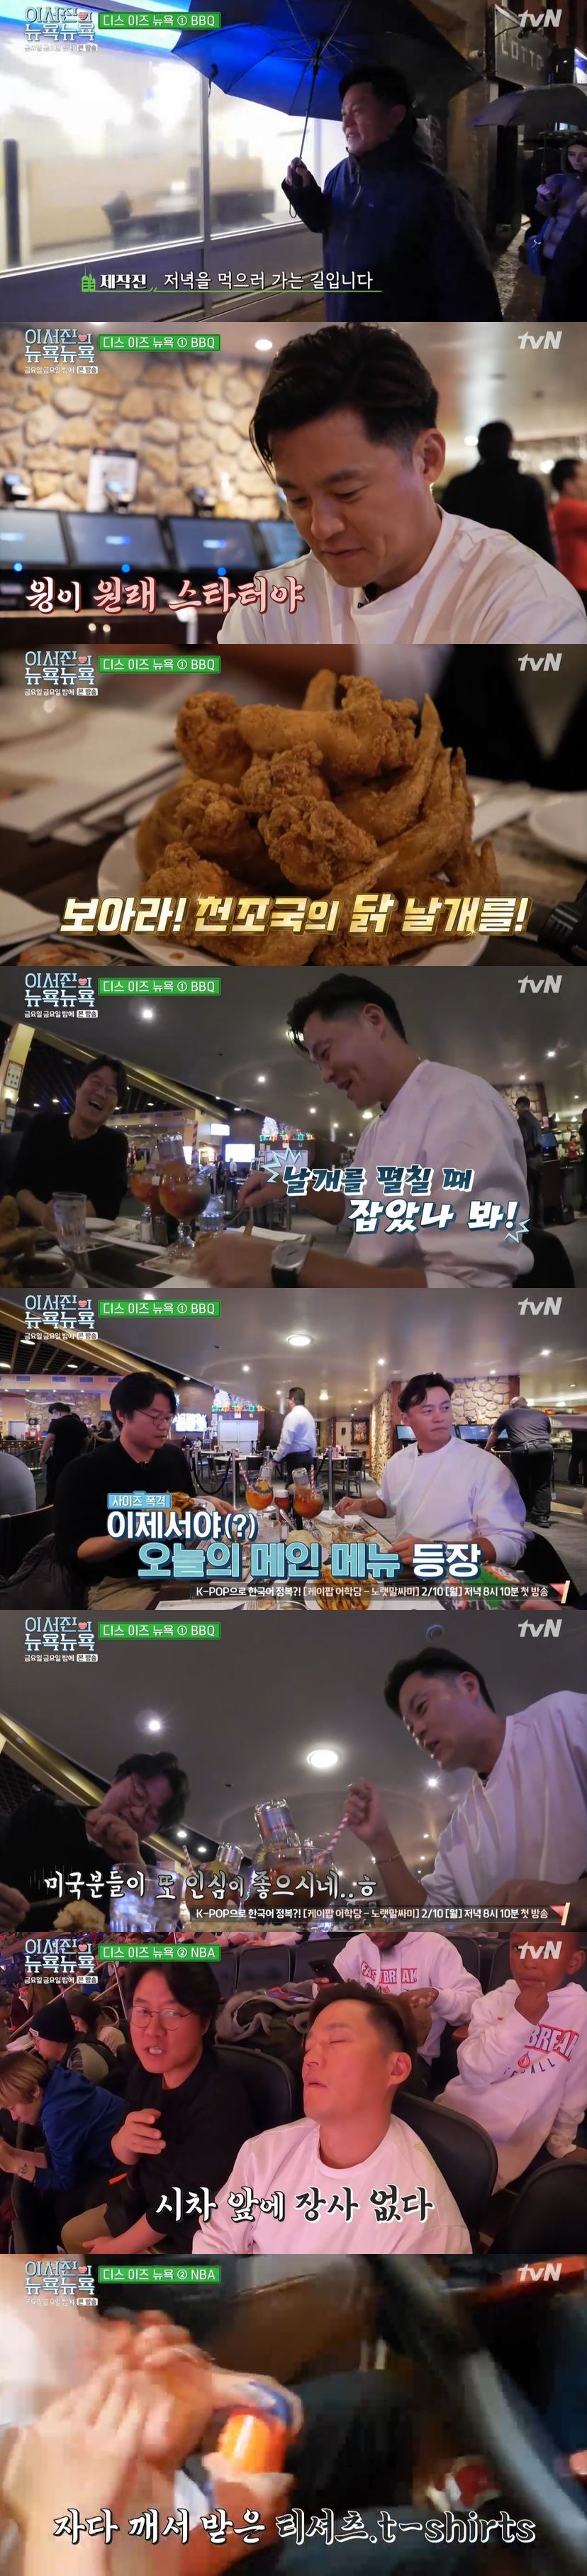 On Friday night, Lee Seo-jin and Na Young-Seok PD were surprised by the extraordinary class of United States of America.On the afternoon of the 17th, TVN entertainment program Friday Friday night, Lee Seo-jin introduced New York through Lee Seo-jins New York New York.Lee Seo-jin led the production team and said, United States of America, we should eat United States of America.My only favorite United States of America food. barbecue. Lee Seo-jin ordered the wing as starter; Na Young-Seok PD opened his mouth, saying, Is not the original starter a salad? Is it meat?Na Young-Seok then complained, Ive come to some place like this, Im going to Chinatown. Lee Seo-jin said, Im sick of coming to this place from the beginning.I have to adapt slowly, he replied and laughed.At this point the wing came out: Lee Seo-jin and Na Young-Seok opened their mouths to the extraordinary wing size; Lee Seo-jin said, This is not a Chicken wing.This is a Cinemaous vulture wing, said Na Young-Seok, who was surprised to see the ship singing only with the starter wing.The dish was then served, and the amount of this dish was not enough, and Na Young-Seok laughed, saying, United States of America are very kind.After such a satisfying dinner, they went to see United States of America professional basketball NBA Kyonggi.Na Young-Seok said, The players are really big. Lee Seo-jin also surprised, saying, Kyonggi is small?But soon after Kyonggi started, Lee Seo-jin began to fall asleep because he could not adapt properly to the time lag.Then, waking up in the middle, Lee Seo-jin smiled embarrassmentally, when the players T-shirt flew into the stands.With all the crowds hands heading to the T-shirts, Lee Seo-jin quickly grabbed it, and one of the crowd behind him said Oh, sleepman, stimulating the crews laughter.Meanwhile, Lee Seung-gi has been playing the situation since dawn and announced the start of experience life factory.Lee Seung-gi said, I do not have a day to rest because I keep working.Lee Seung-gi then found a Hanwa factory in Hanwa village in Sacheon-myeon, Gangneung; Lee Seung-gi initially showed a poor side.Lee Seung-gi expressed anxiety, saying, Is there any staff on the way? But after a while, Lee Seung-gi gradually adapted and melted into the factory.Another corner was Baro My Friends Recipe. Jin-kyeong Hong met comedians Yoon Sung-ho and Kim In-seok and headed to Yoon Sung-hos house.Jin-kyeong Hong added, Citizens, you cant think that my Friend is the only one. I have many Friends.Jin-kyeong Hong found Yoon Sung-hos youthful photo at Yoon Sung-hos house and said, At this time, I had a head.Jin-kyeong Hong told Yoon Sung-hos Mother, How old were your hair?, and Mother said, I went to the army and then I came back, and one day I said, Thats it. The food introduced by Mother of Yoon Sung-ho was Baro seafood miso leek bibimbap, and Jin-kyeong Hong admired it as How does this taste?